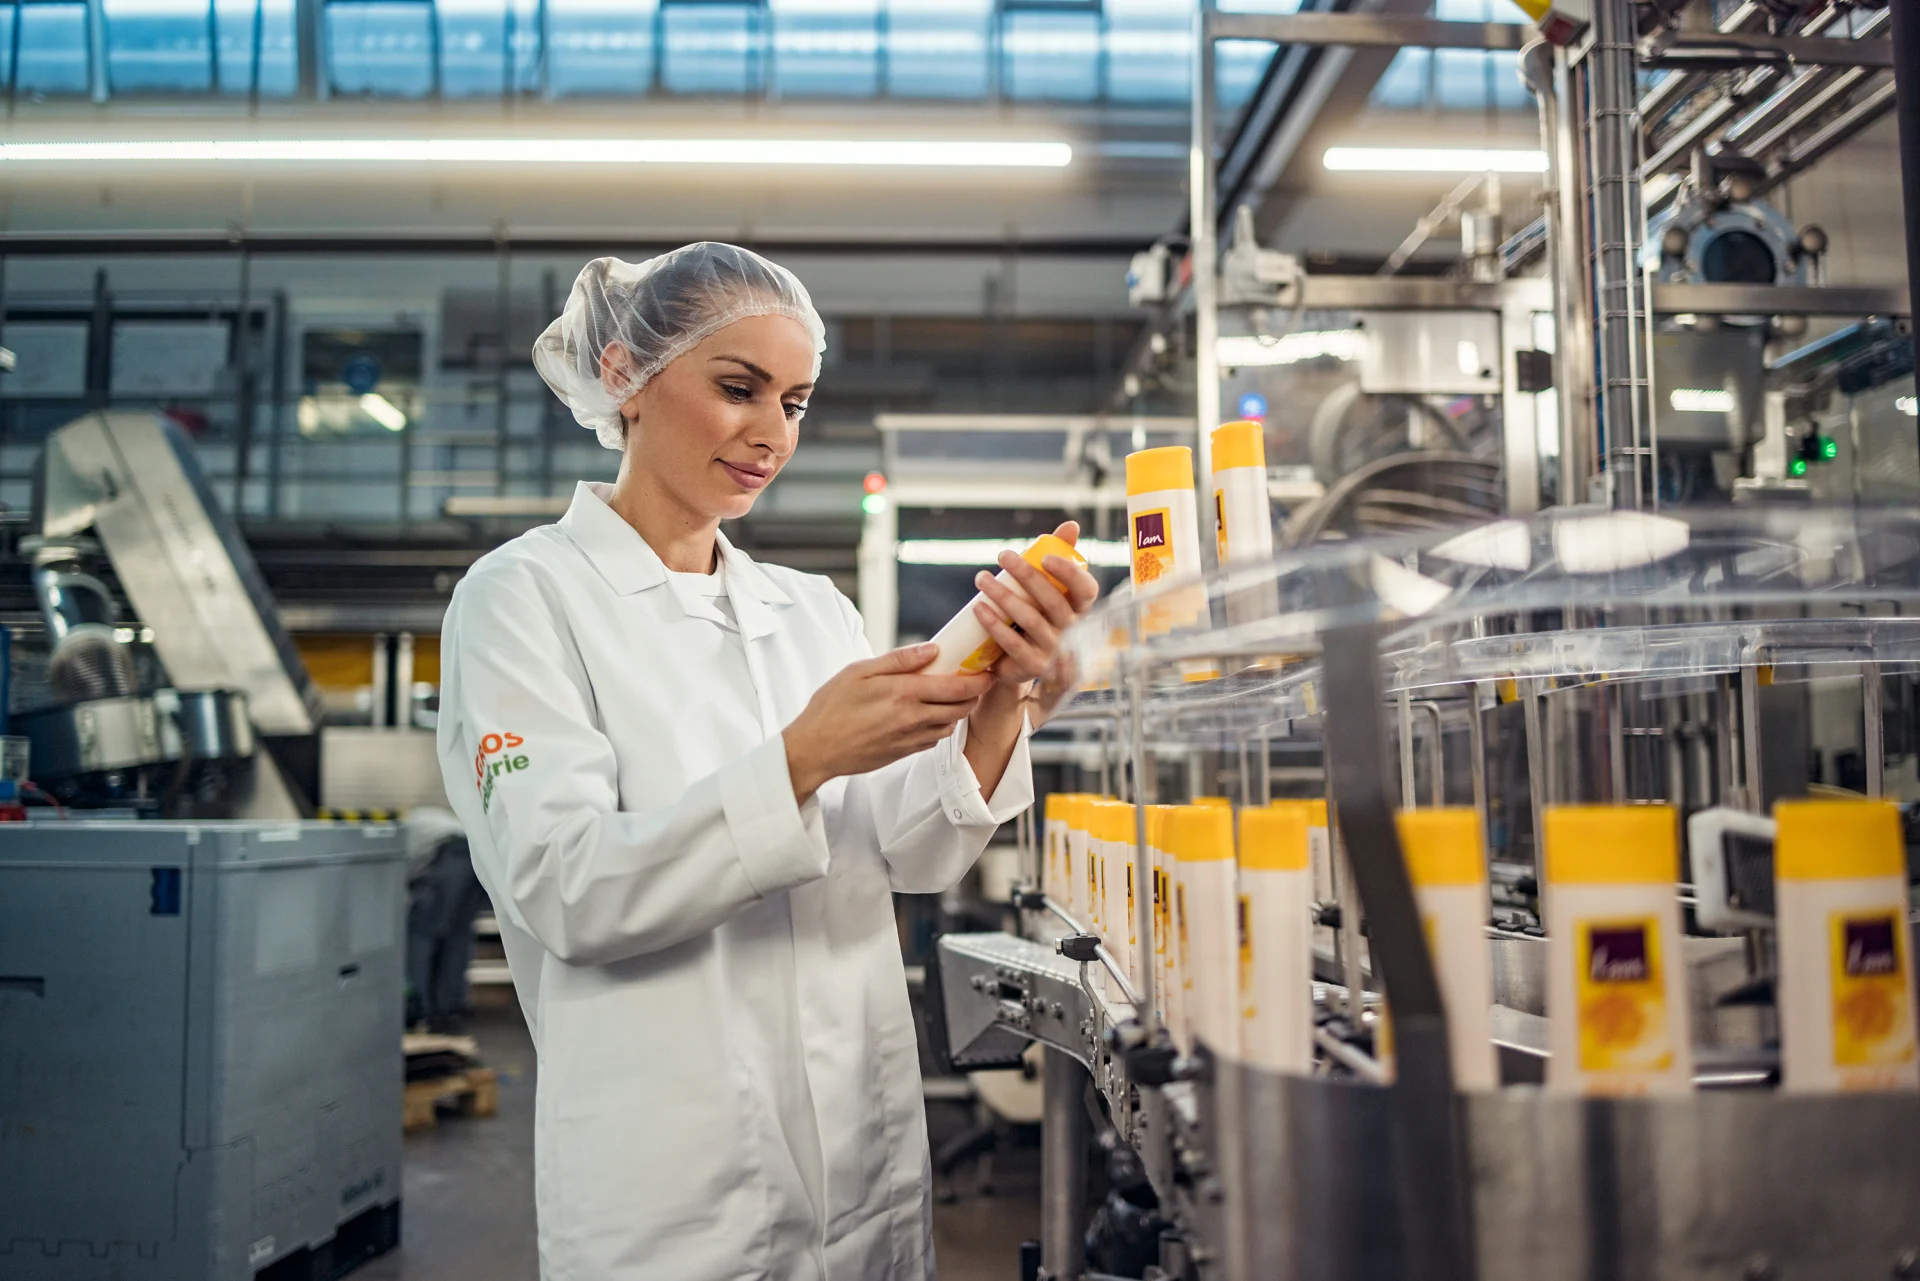 A Migros Industrie employee holds an “I am” shower gel bottle in her hands at the factory